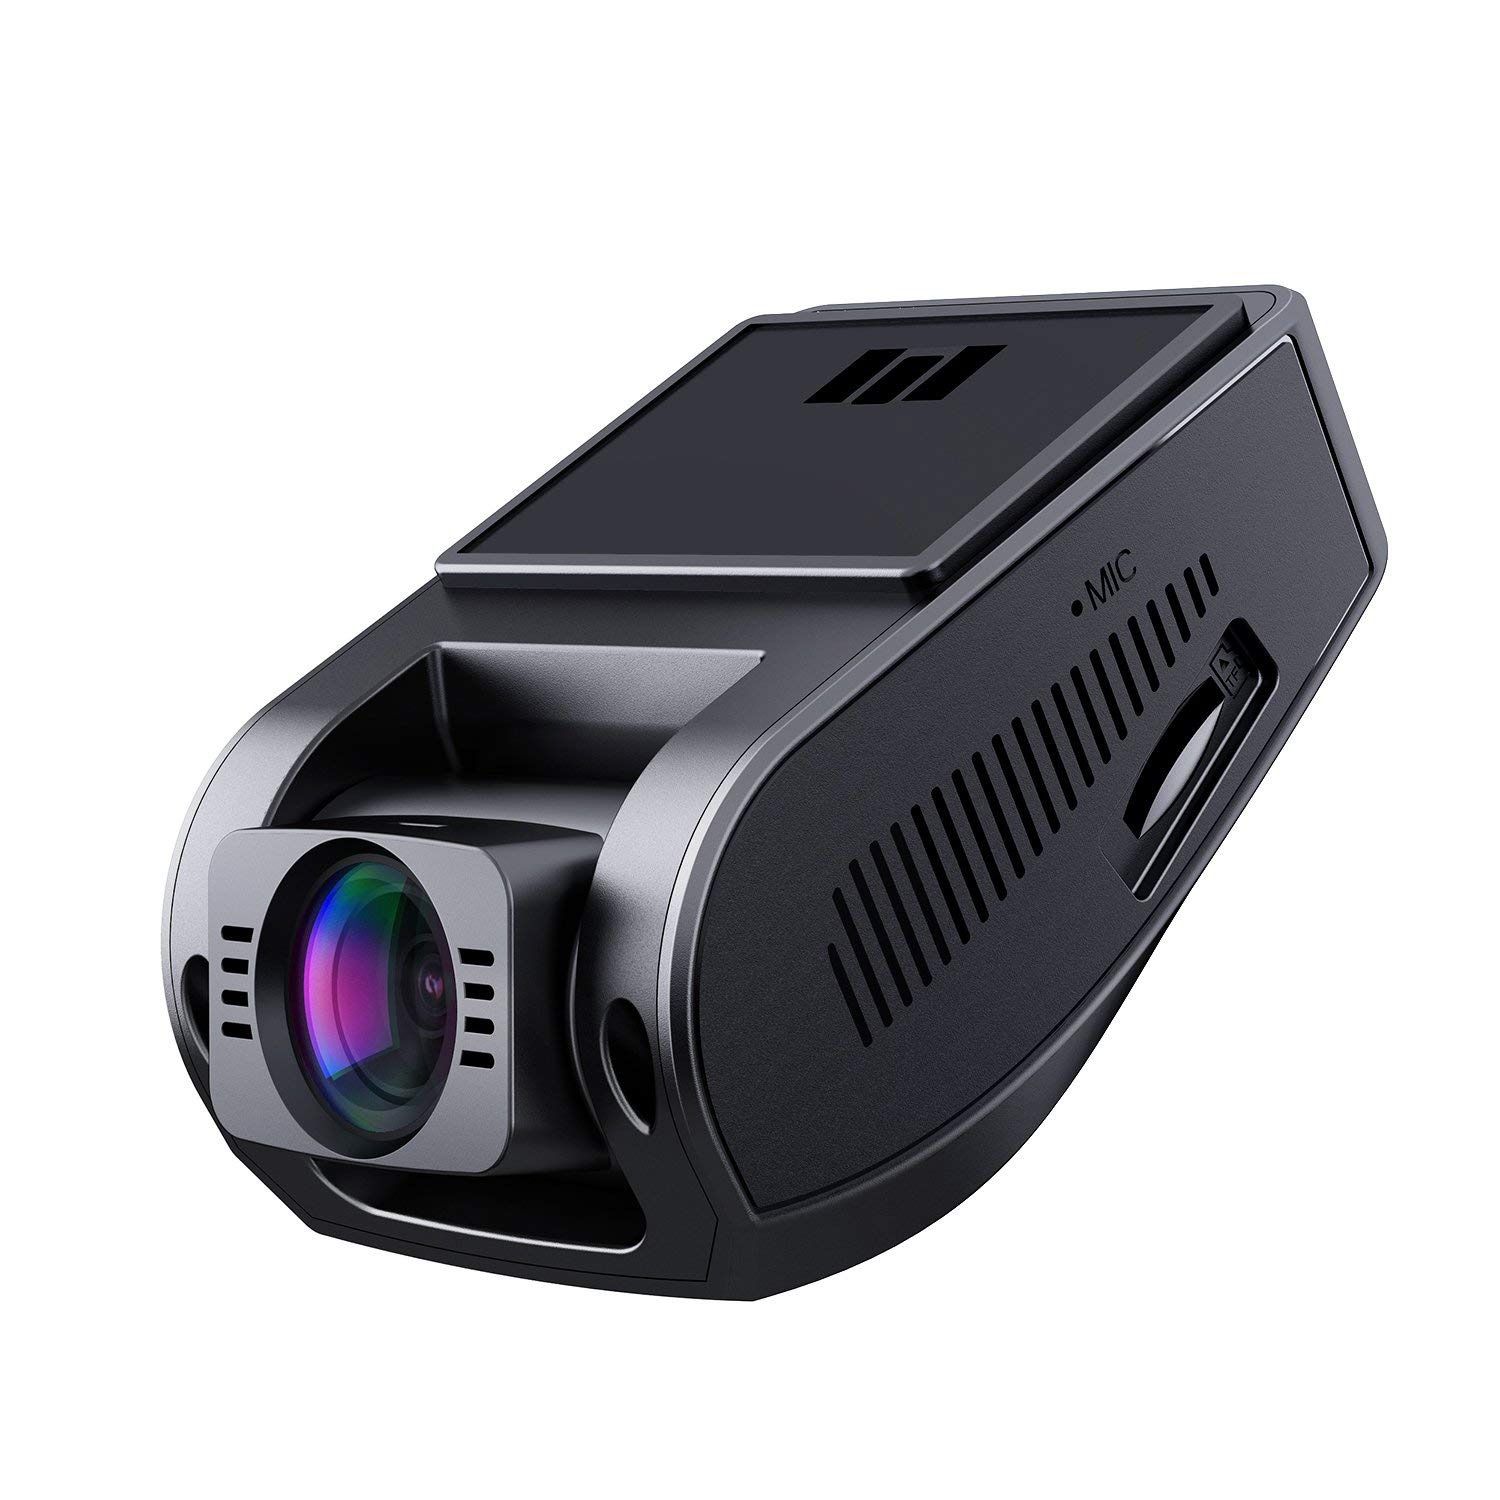 New AUKEY Dash Cam, 1080P Dashboard Camera Recorder, 6-Lane 170 Degree Wide Angle Lens, Supercapacitor, G-sensor and Clear Nighttime Recording